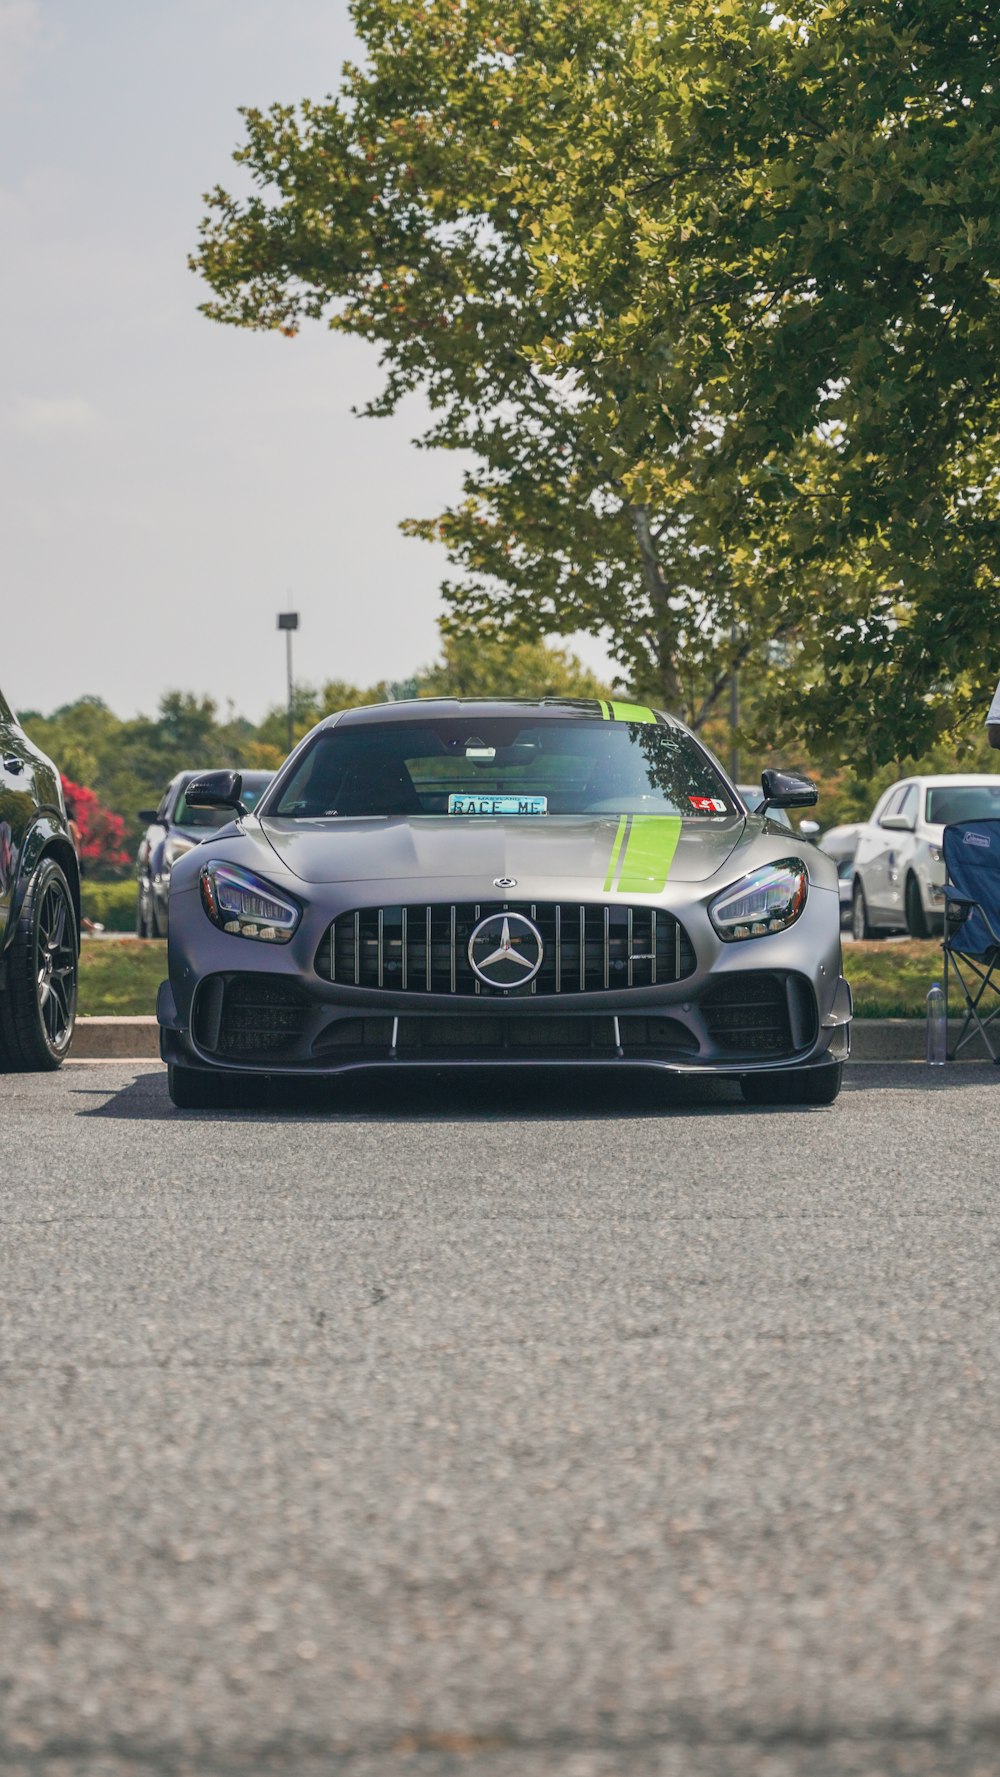 a mercedes sports car parked in a parking lot